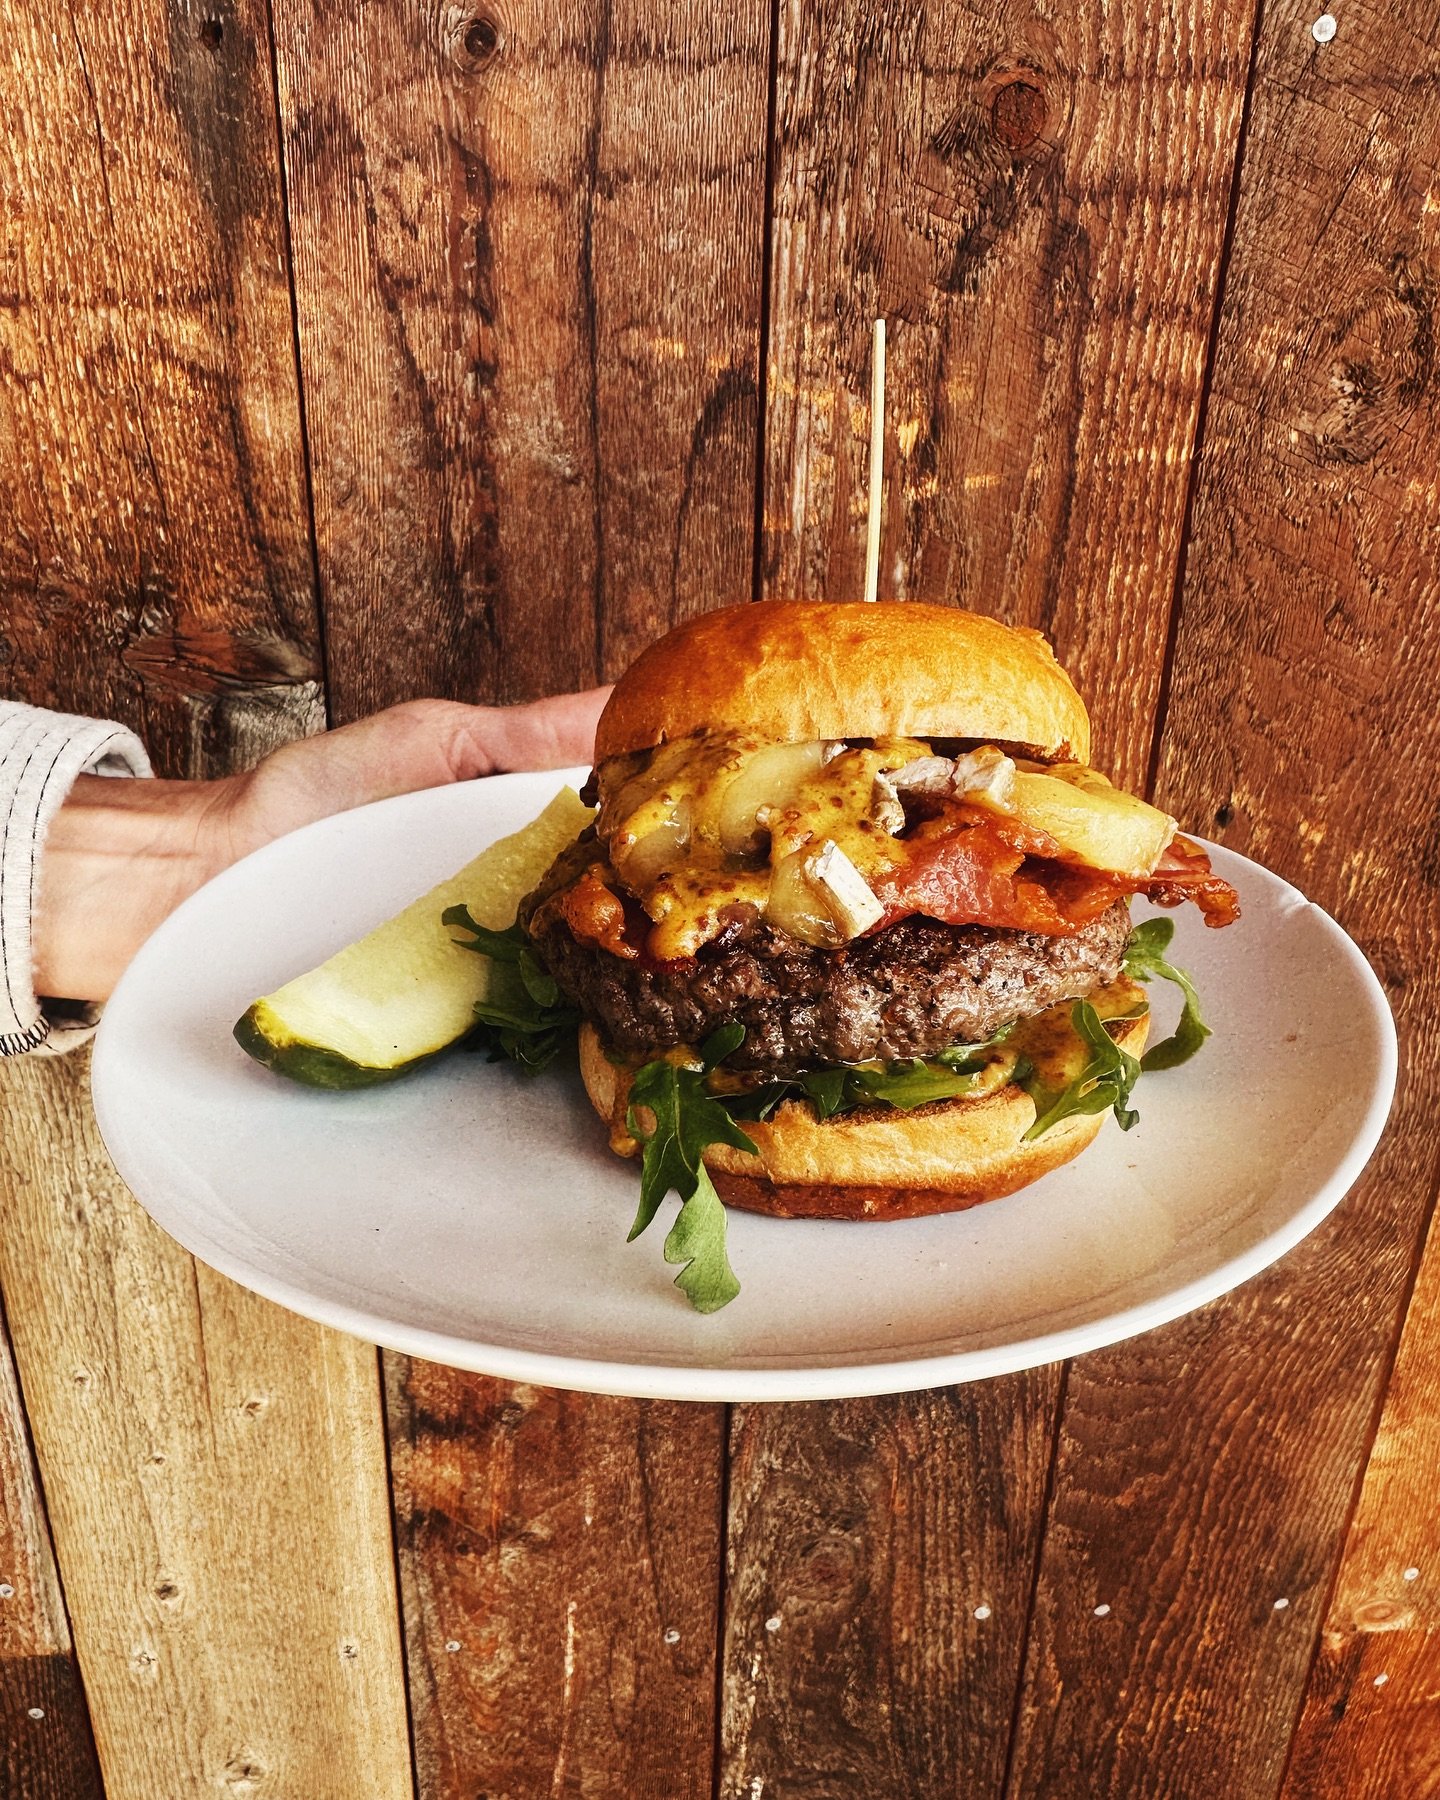 Have you tried our burgers? We have burger specials every weekend along with a classic bacon cheeseburger.
Get $1 off for happy hour, Friday + Saturday, 2pm-6pm